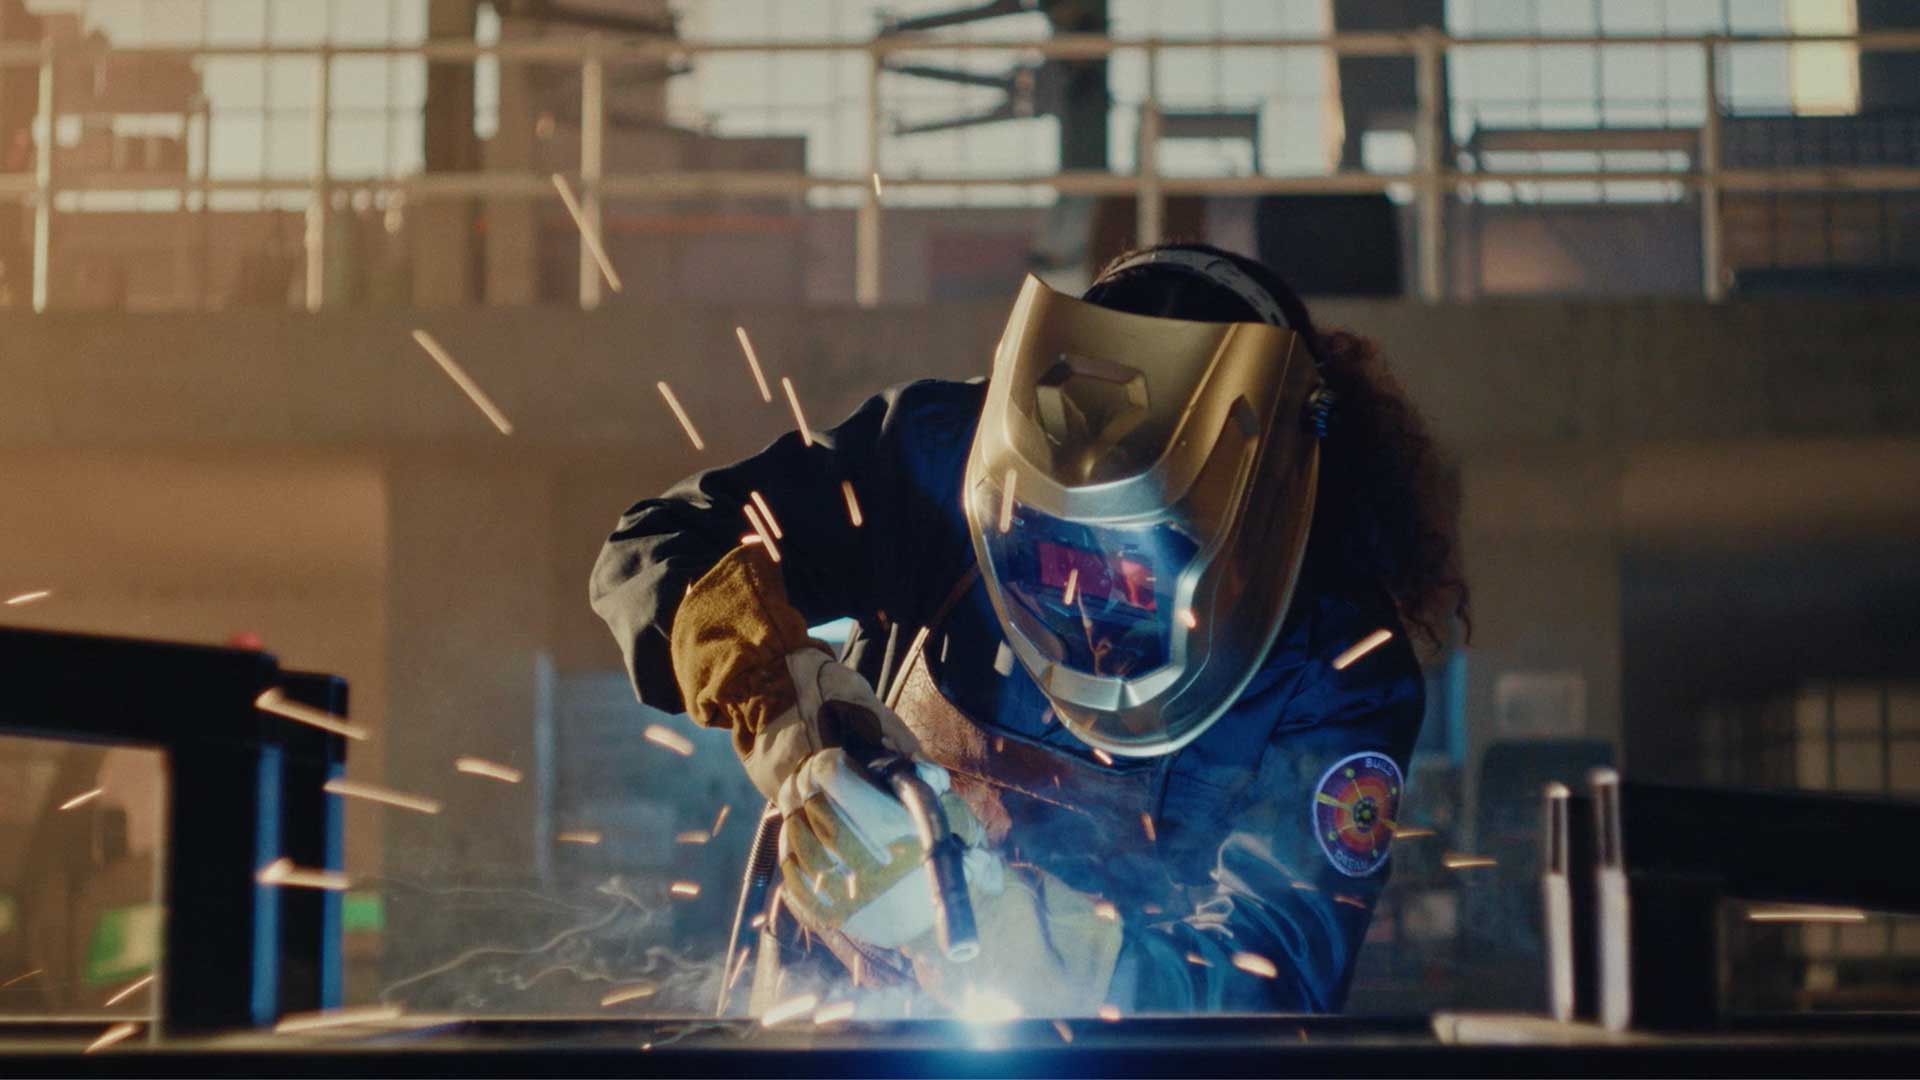 Still from John Deere's All Kinds of Fields spot of Maya welding with sparks flying in an industrial setting